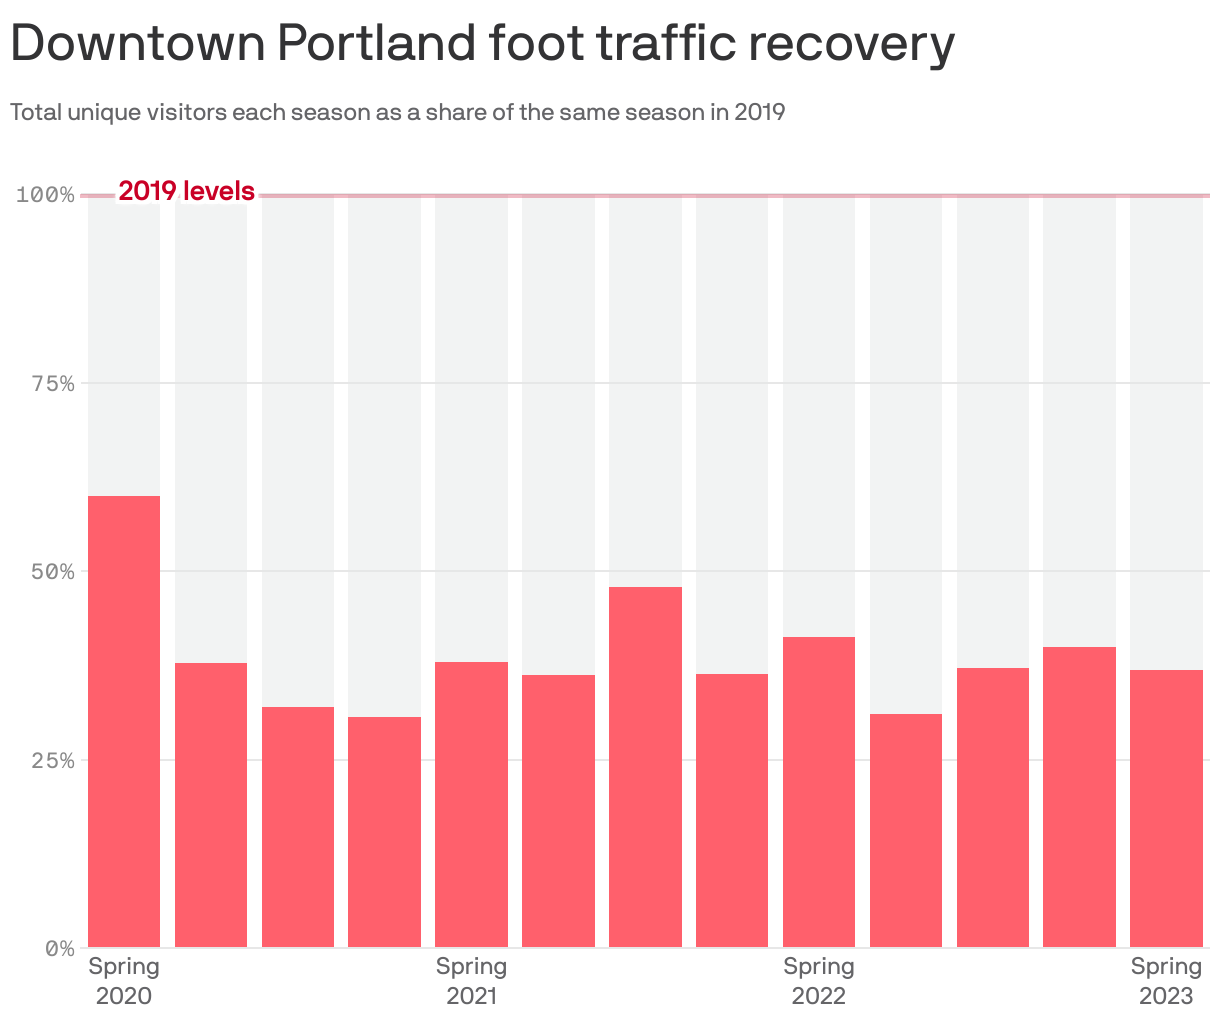 Downtown Portland foot traffic recovery